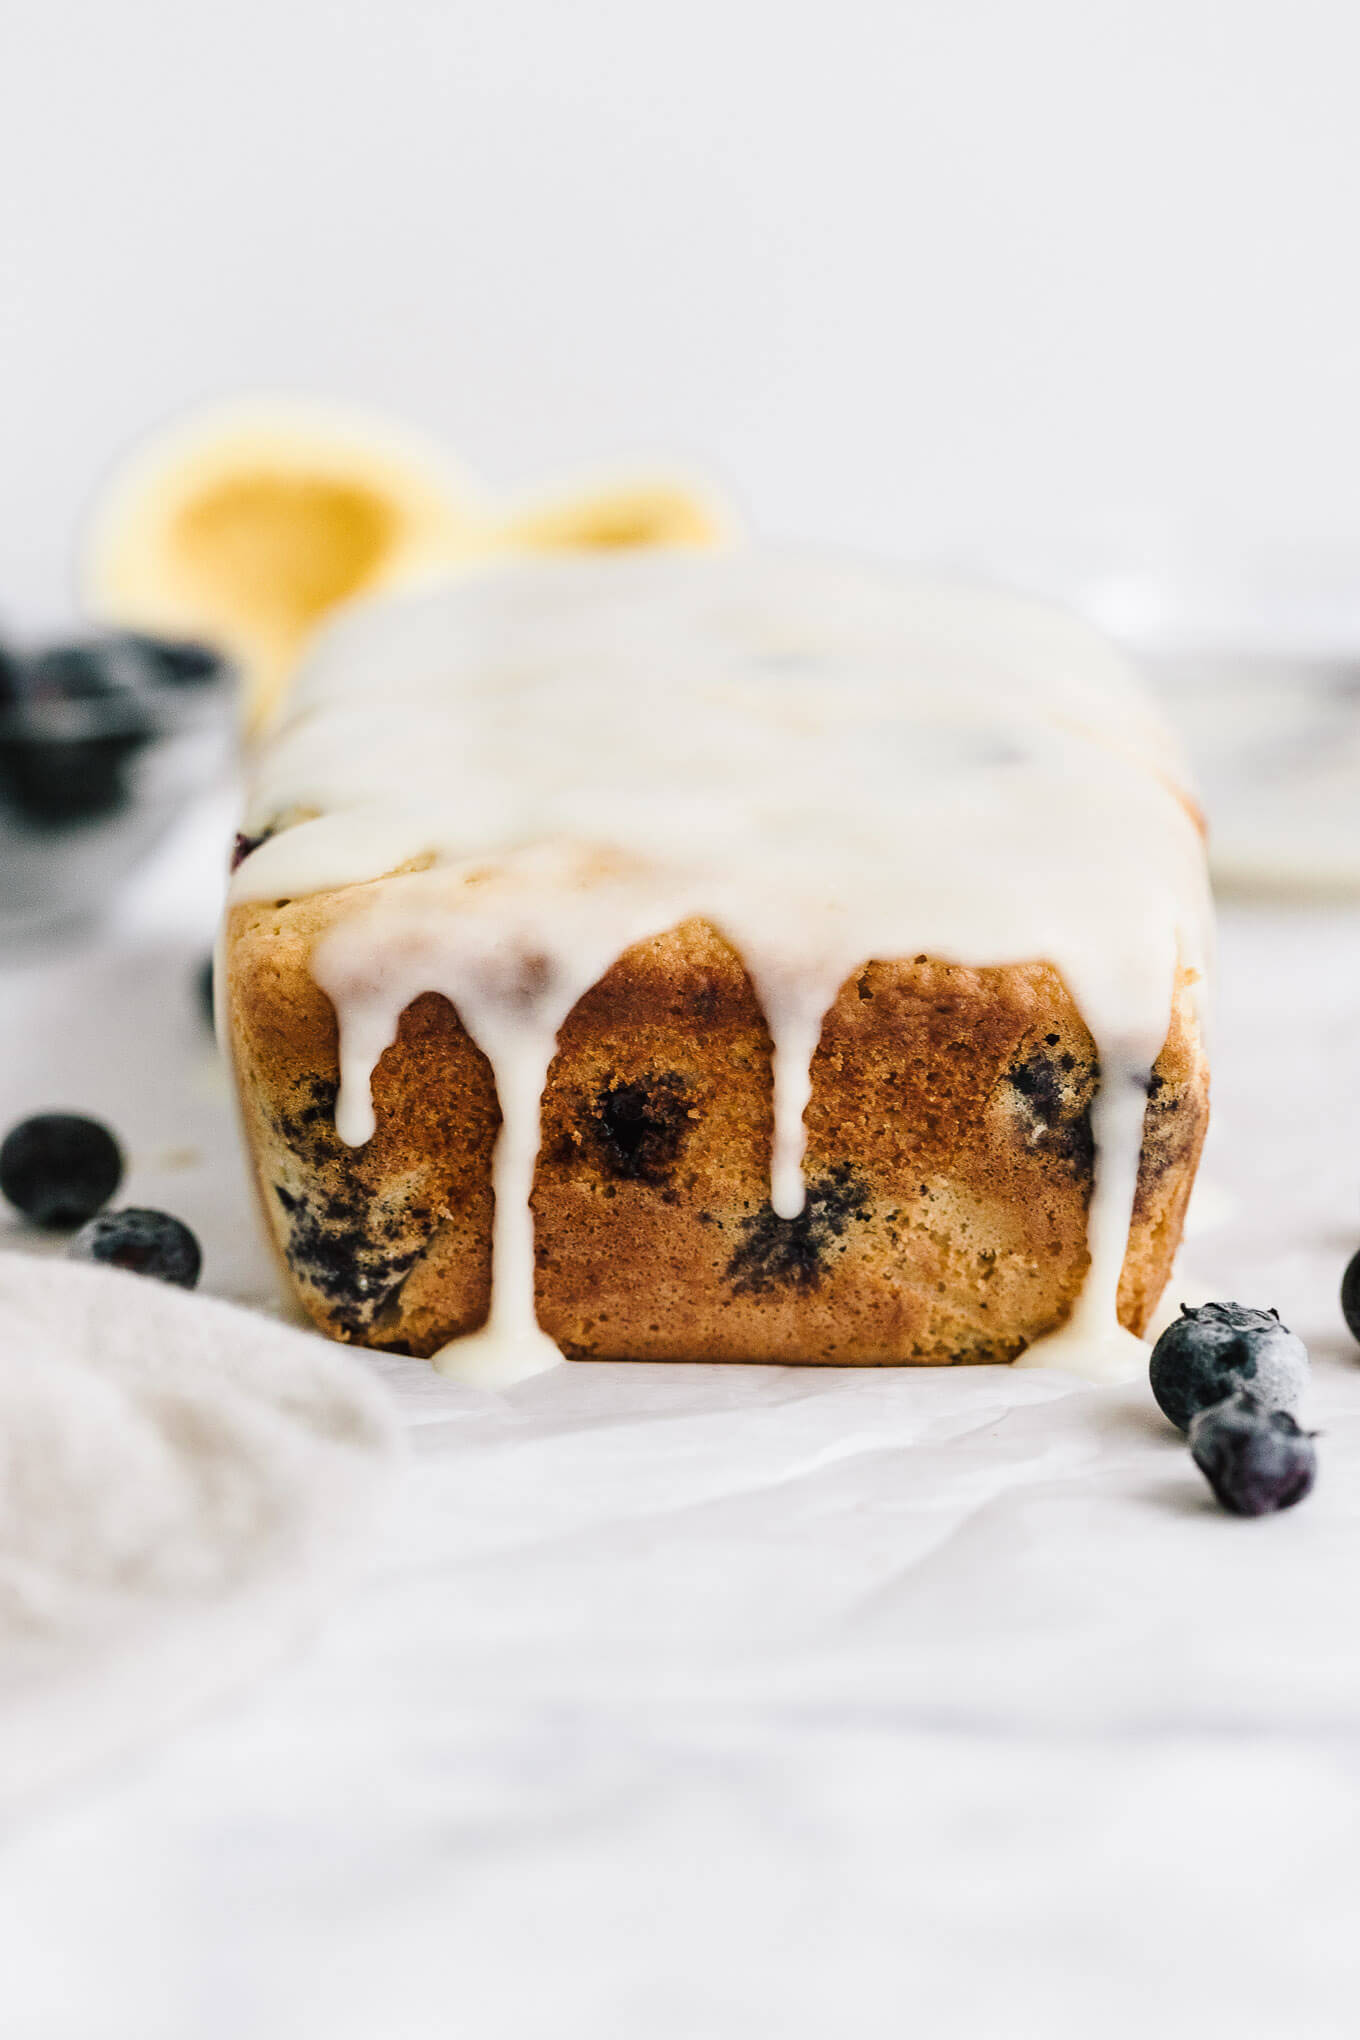 Healthy lemon blueberry bread naturally sweetened with maple syrup and topped with a sweet lemon glaze.